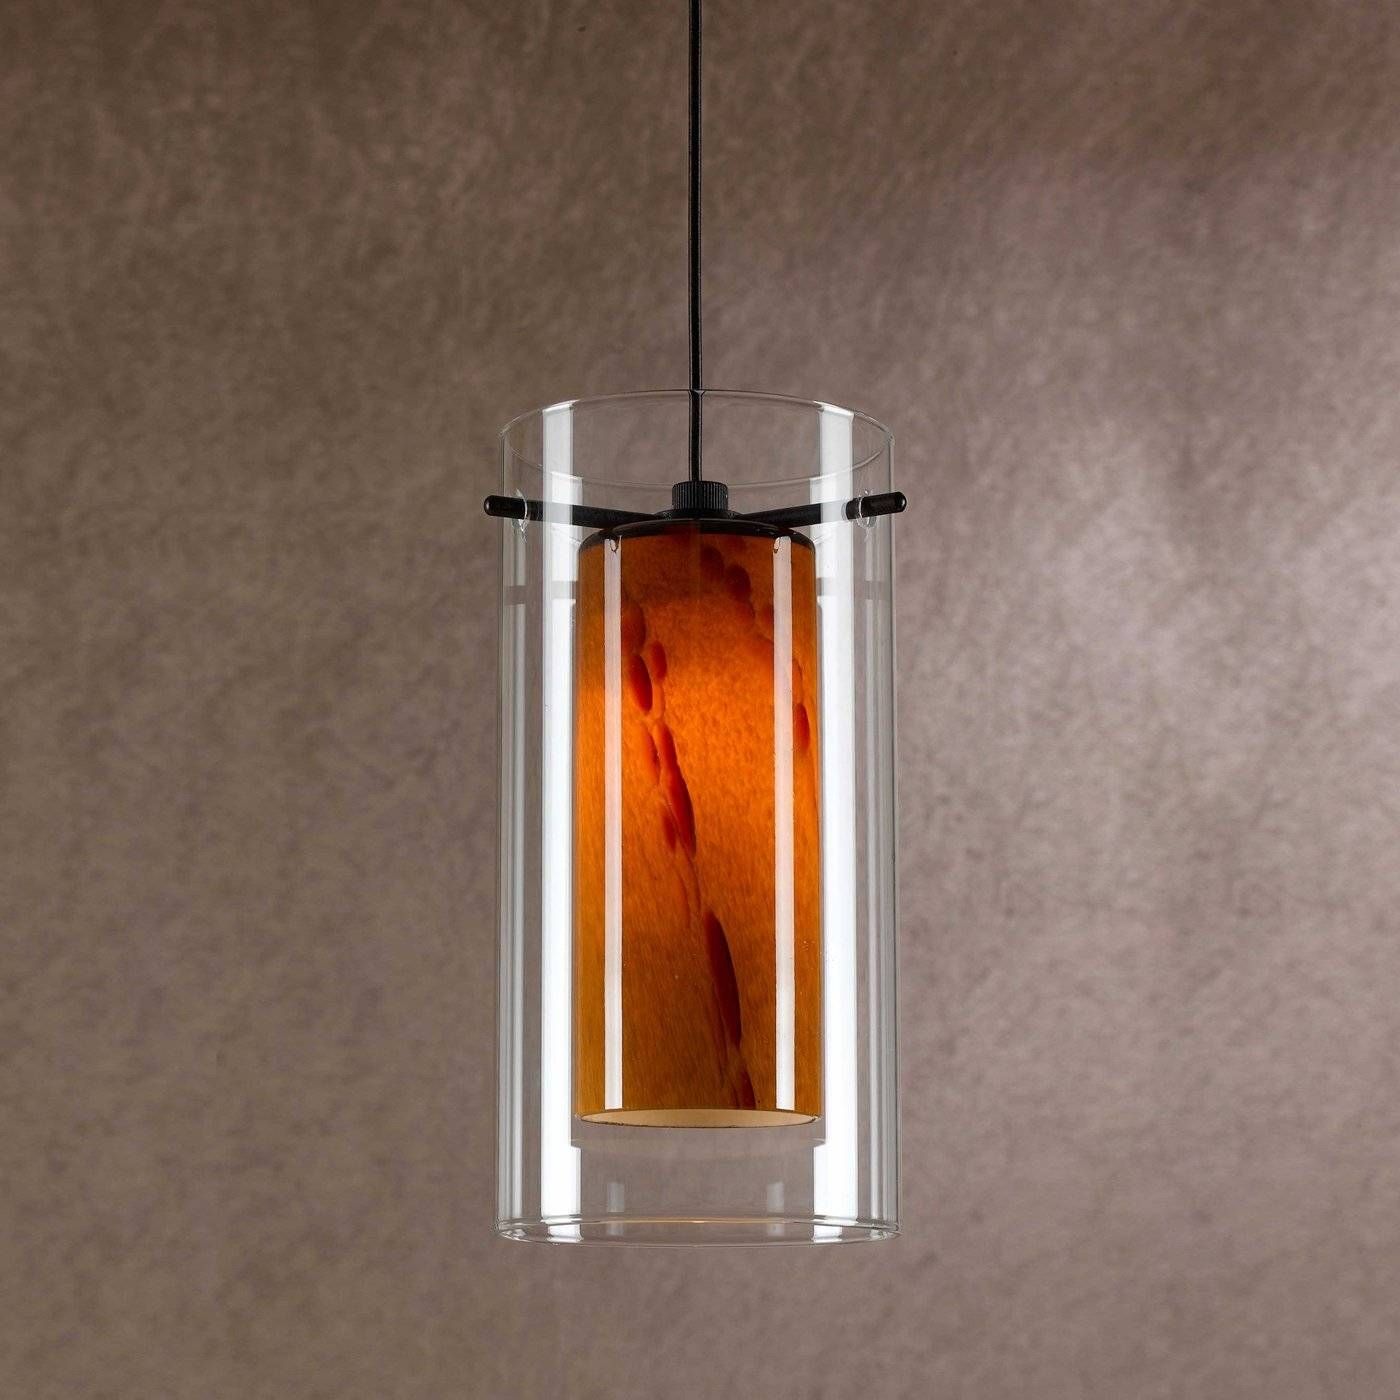 Brilliant Pendant Track Lighting – All About House Design Throughout Low Voltage Pendant Track Lighting (View 2 of 15)